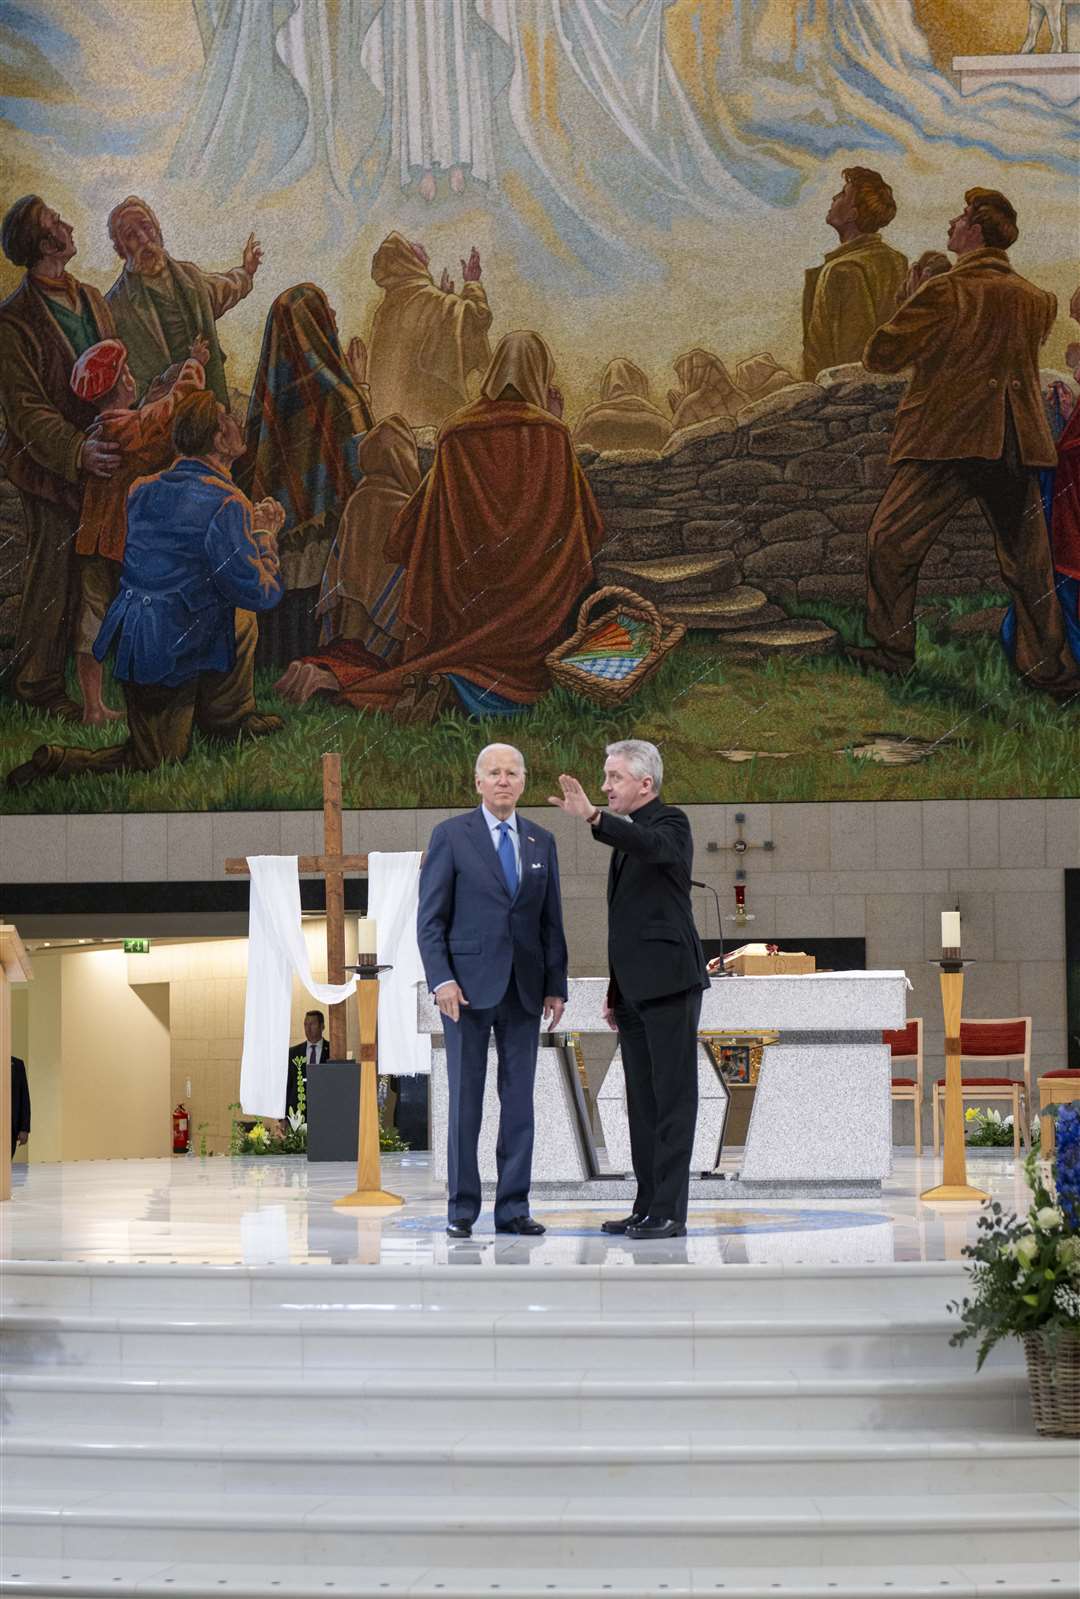 Joe Biden visiting Knock Shrine and Basilica in Mayo with Fr Richard Gibbons (Andrew Downes/Julien Behal Photography/PA)